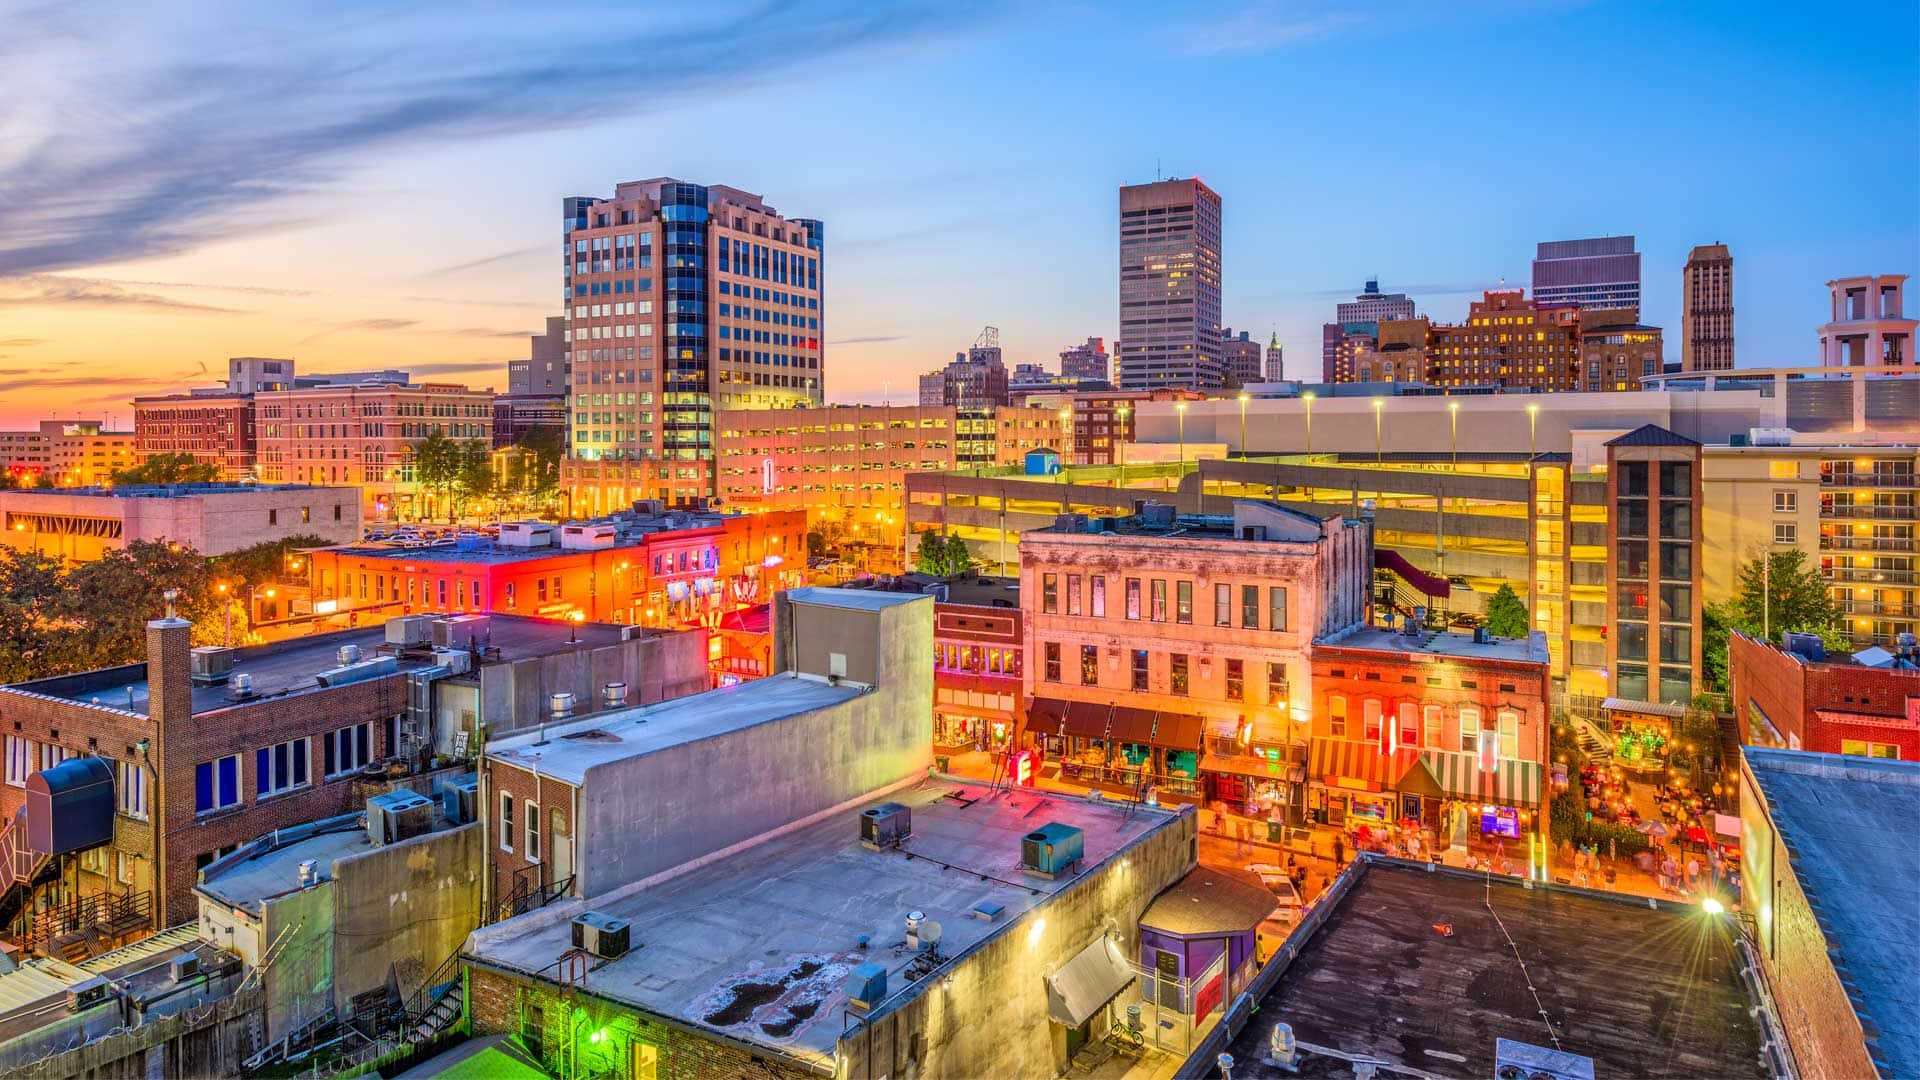 Dive Into the History of Memphis Before You Visit